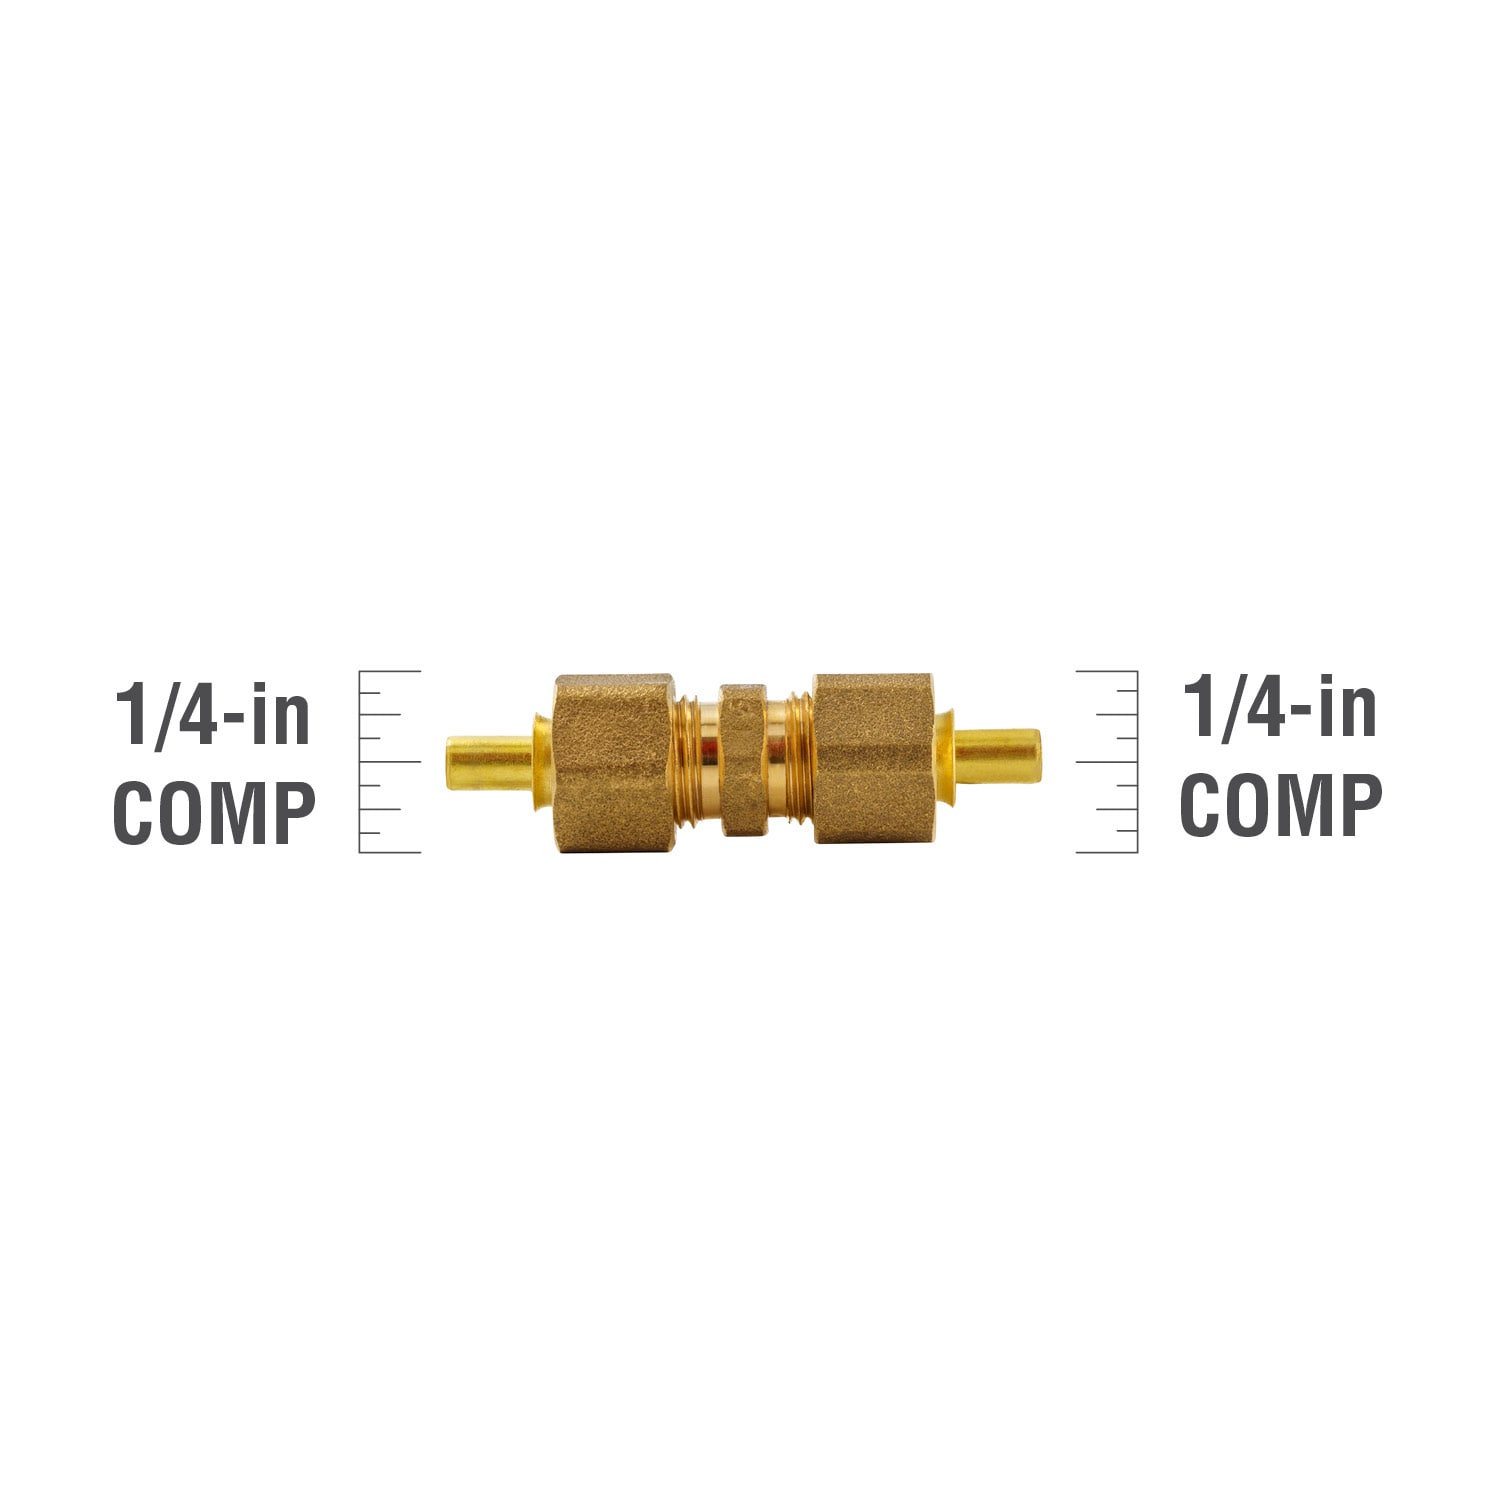 Everbilt 1/4 in. OD Compression Brass Coupling Fitting 801800